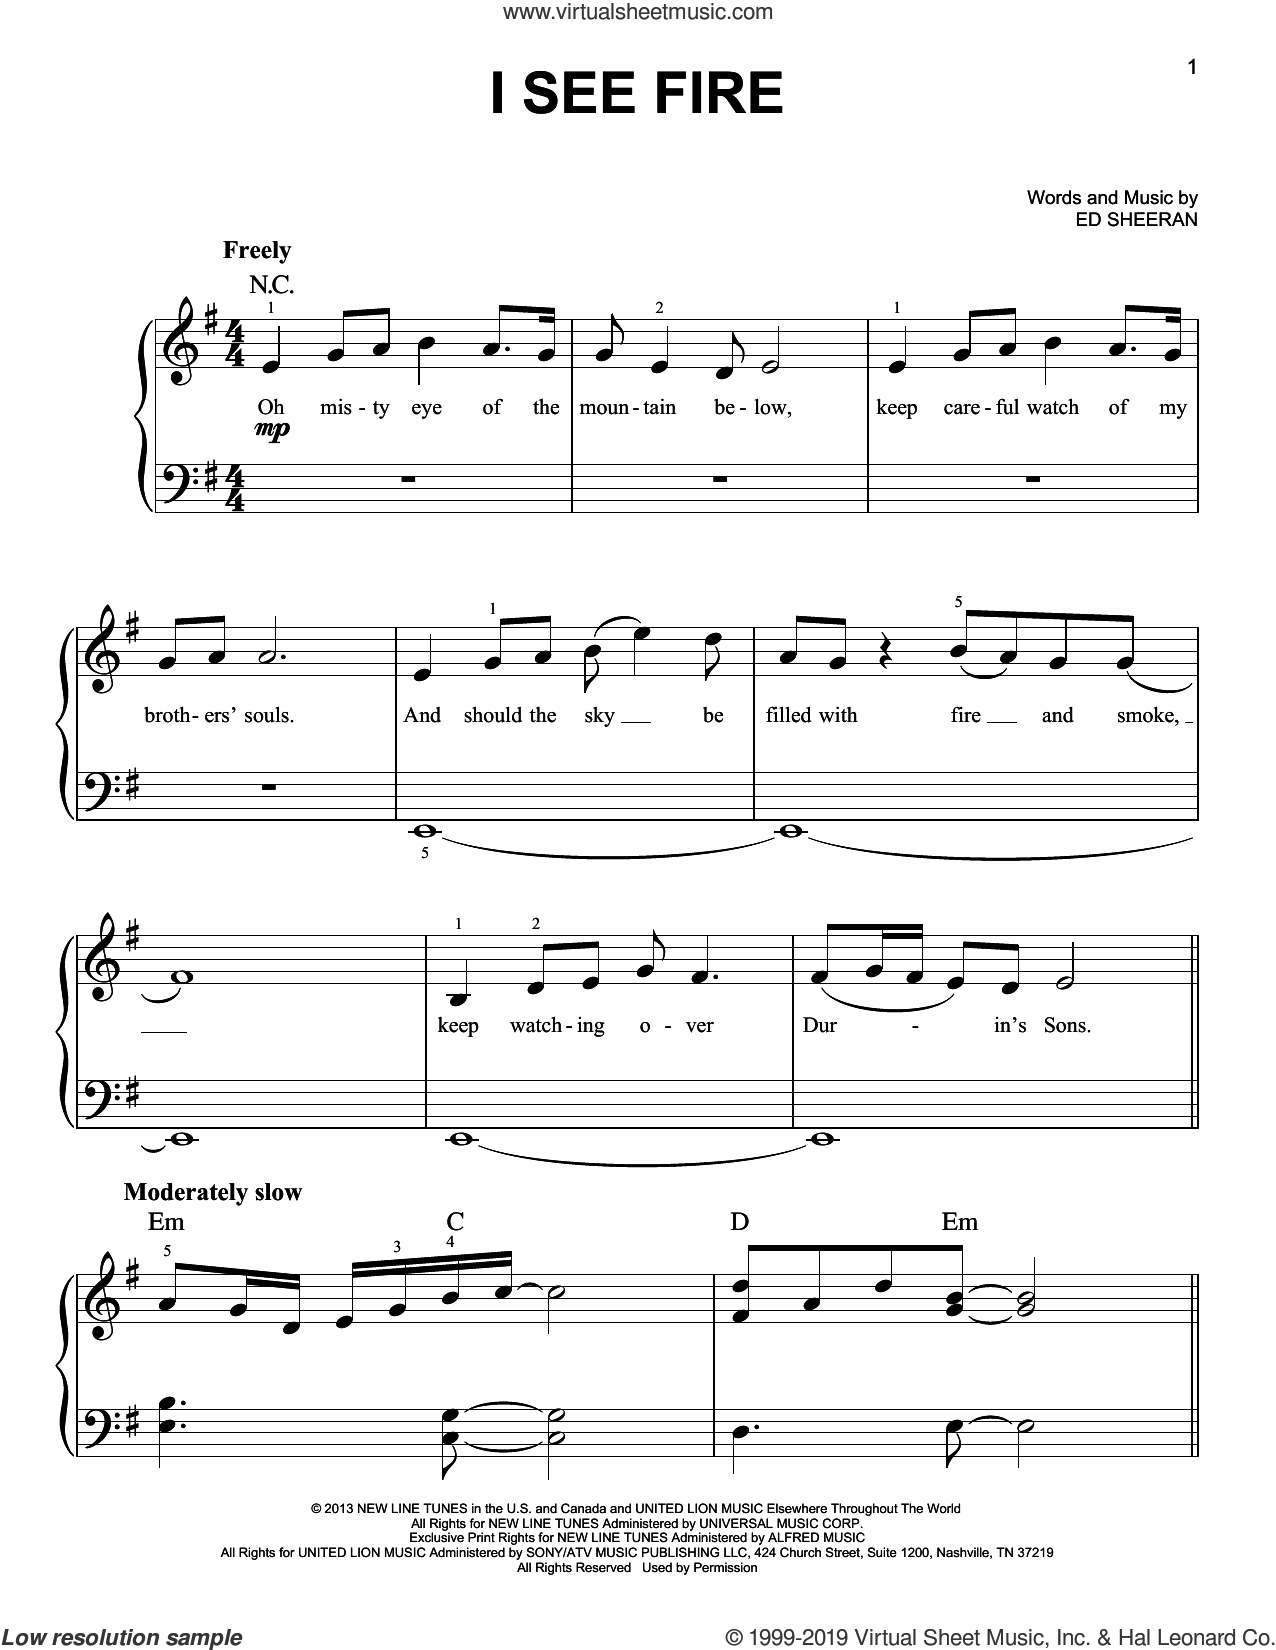 Smitsom sygdom at styre Colonial Ed Sheeran: I See Fire (from The Hobbit) sheet music for piano solo